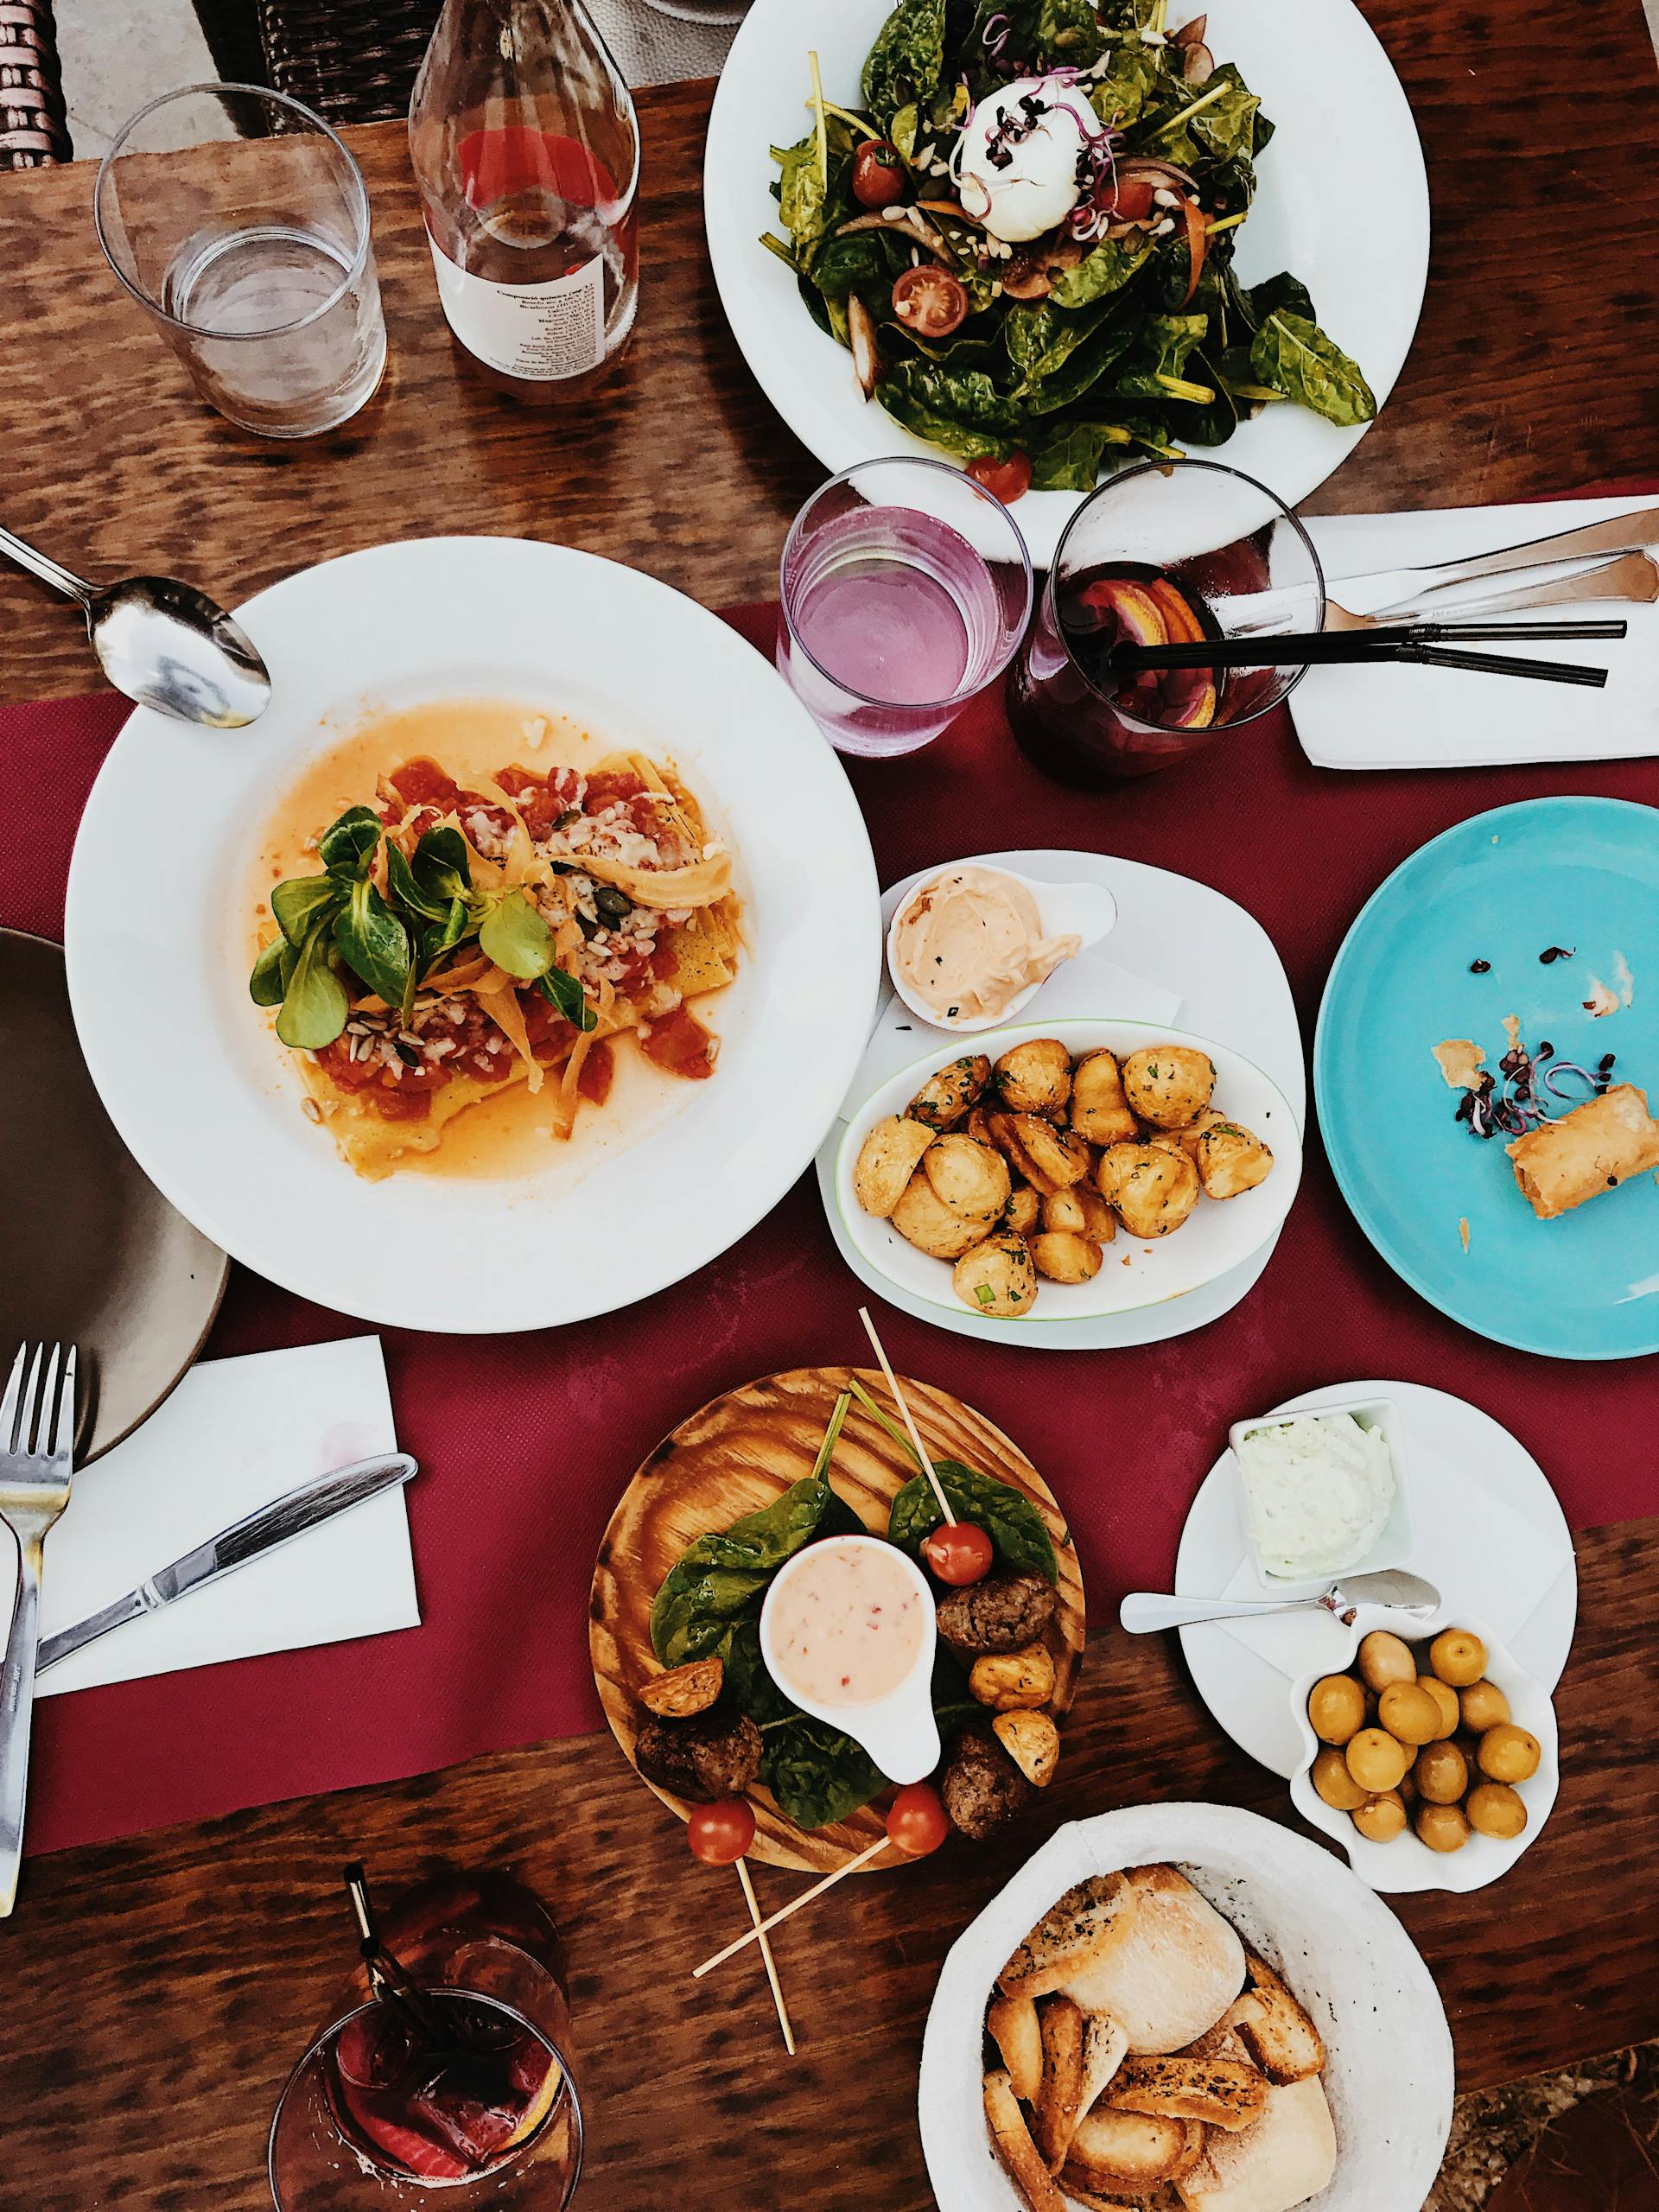 Food served on the table | Source: Pexels